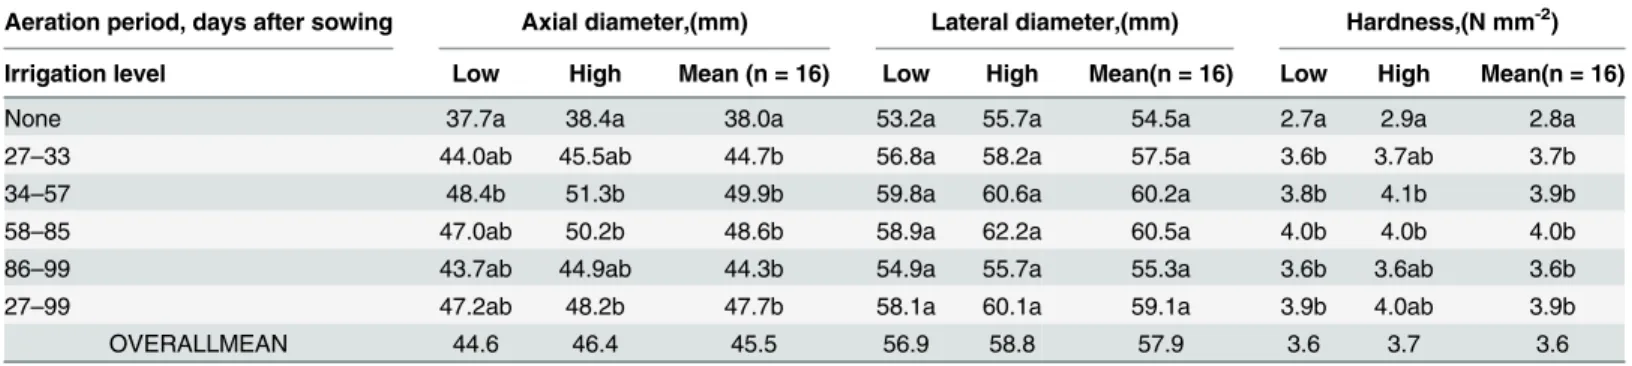 Table 5. Axial and lateral diameter, and hardness measured on the first 8 ripe fruits harvested from the first trusses of 3 potted single tomato plants for 6 post-infiltration aeration treatments (i.e